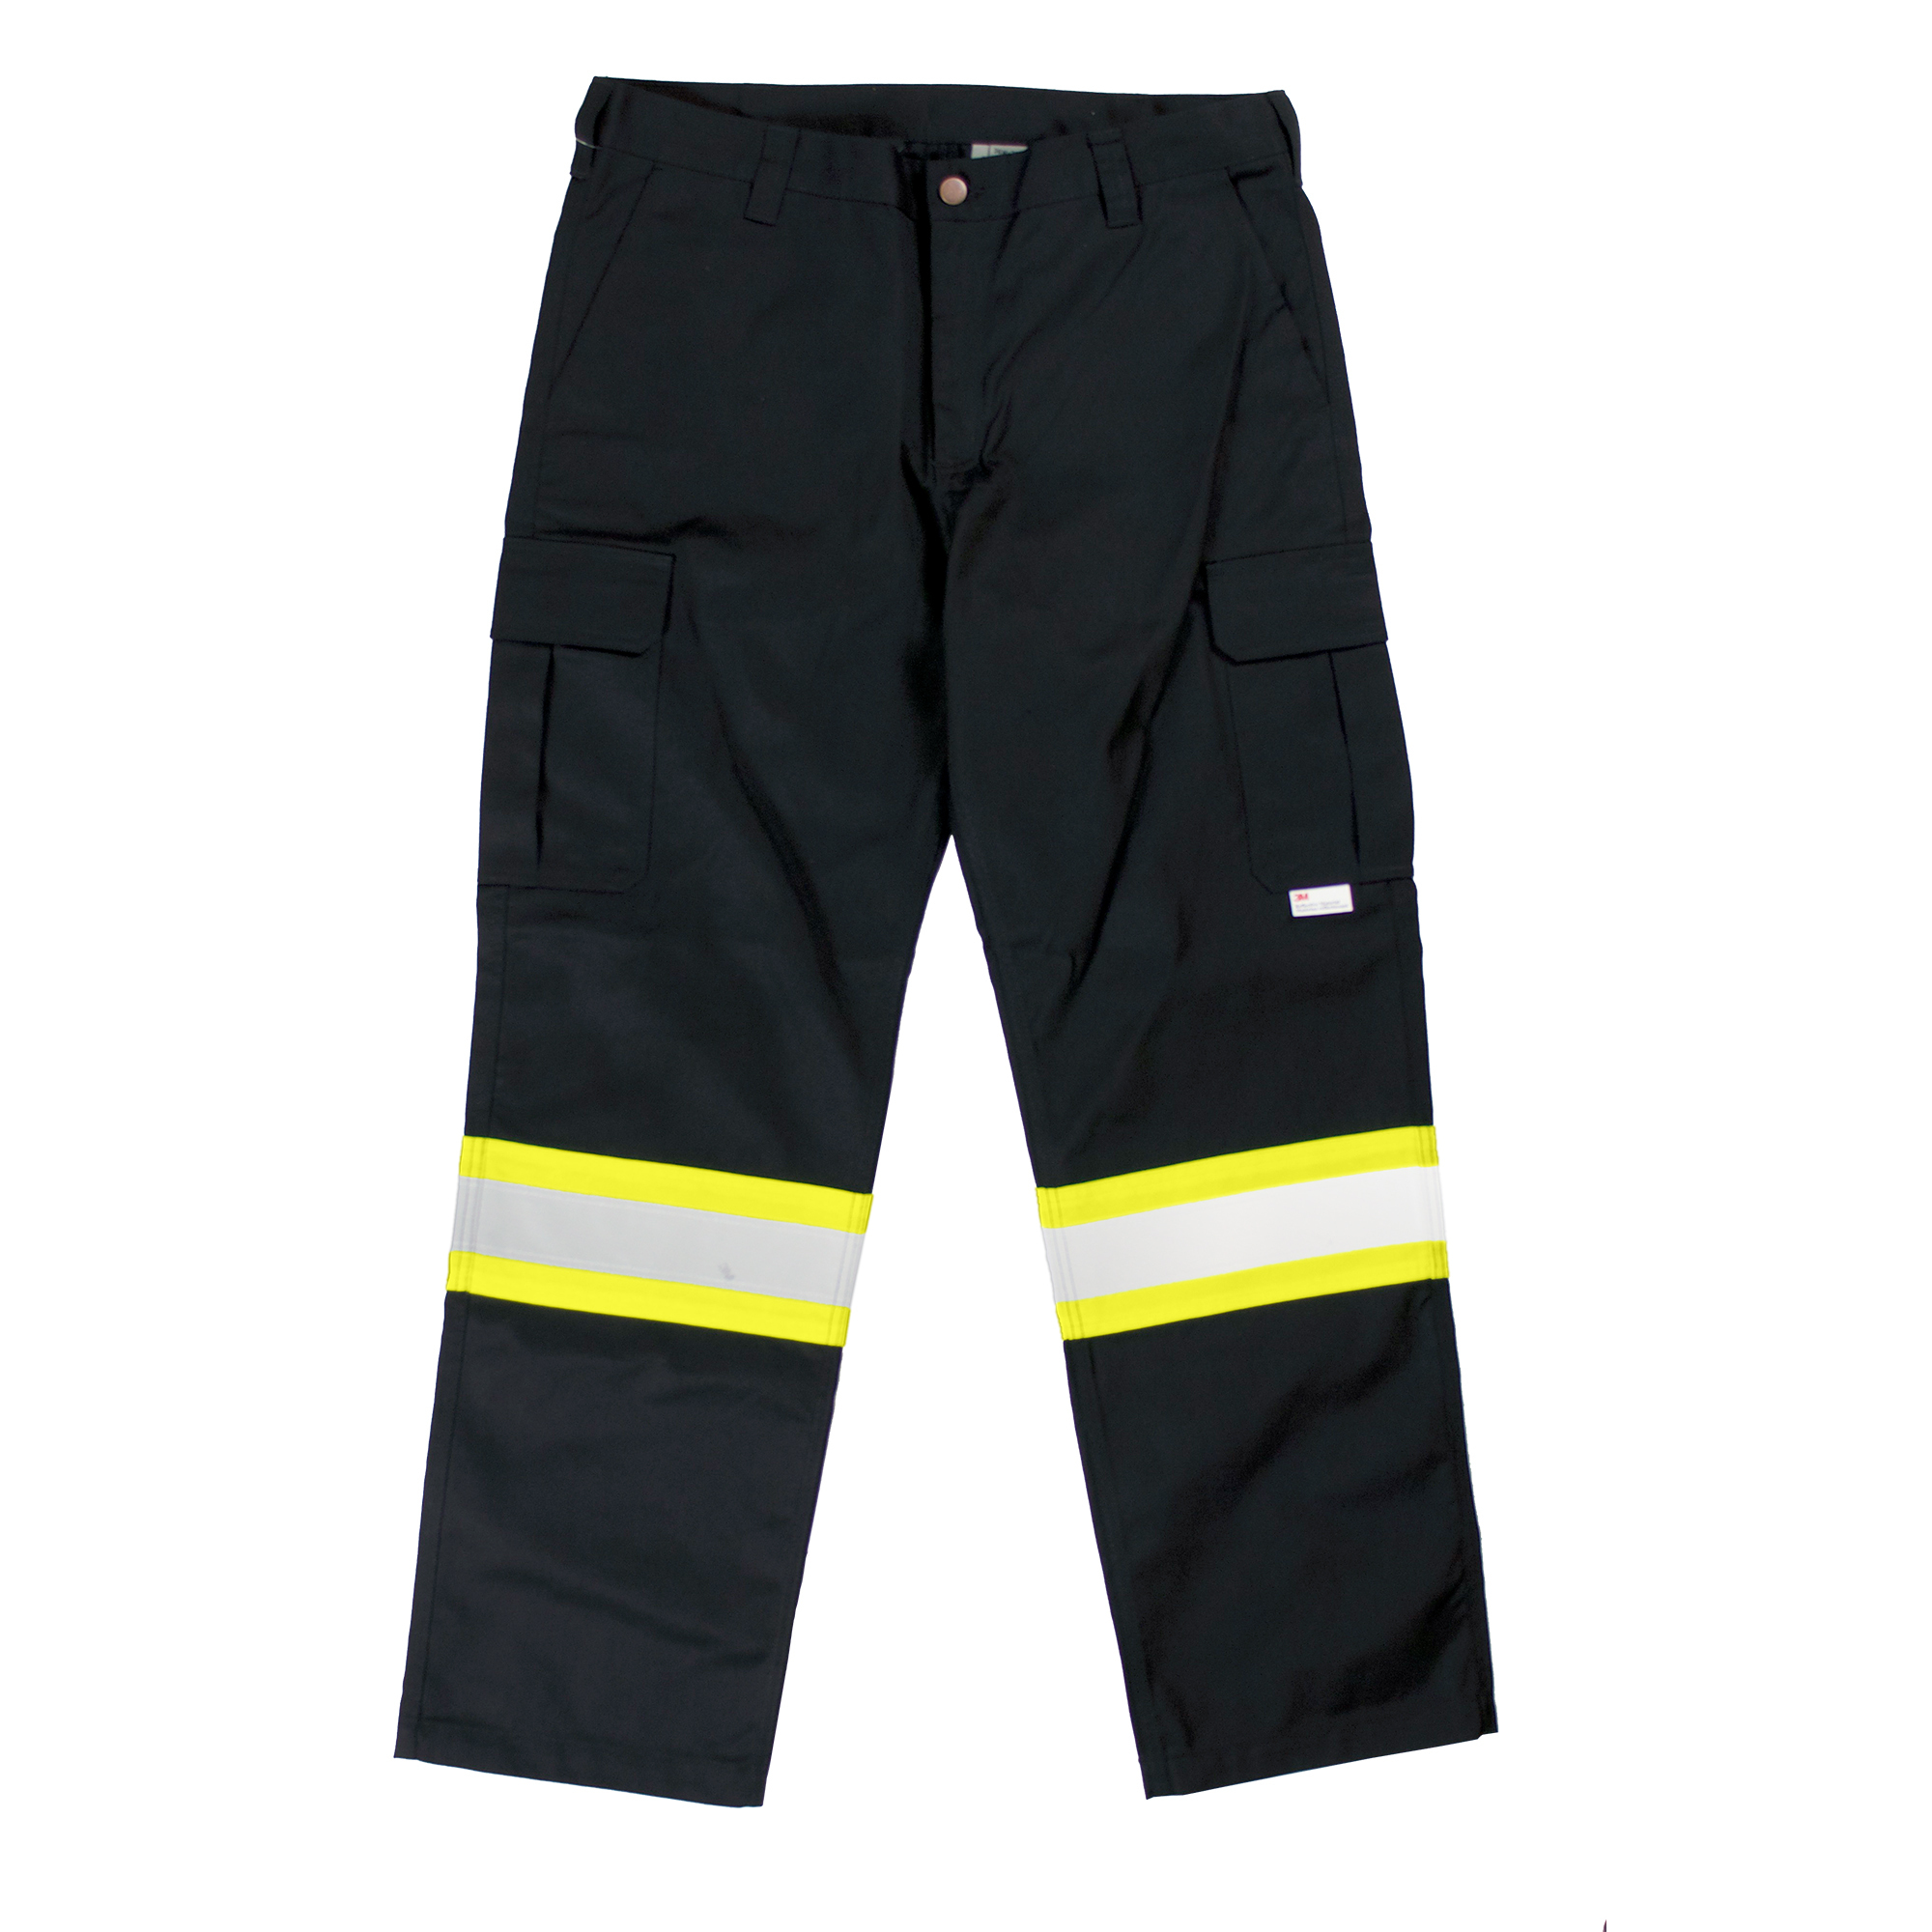 Tough Duck, Safety Cargo Utility Pant, Waist 36 in, Inseam 30 in, Color Black, Model S60701